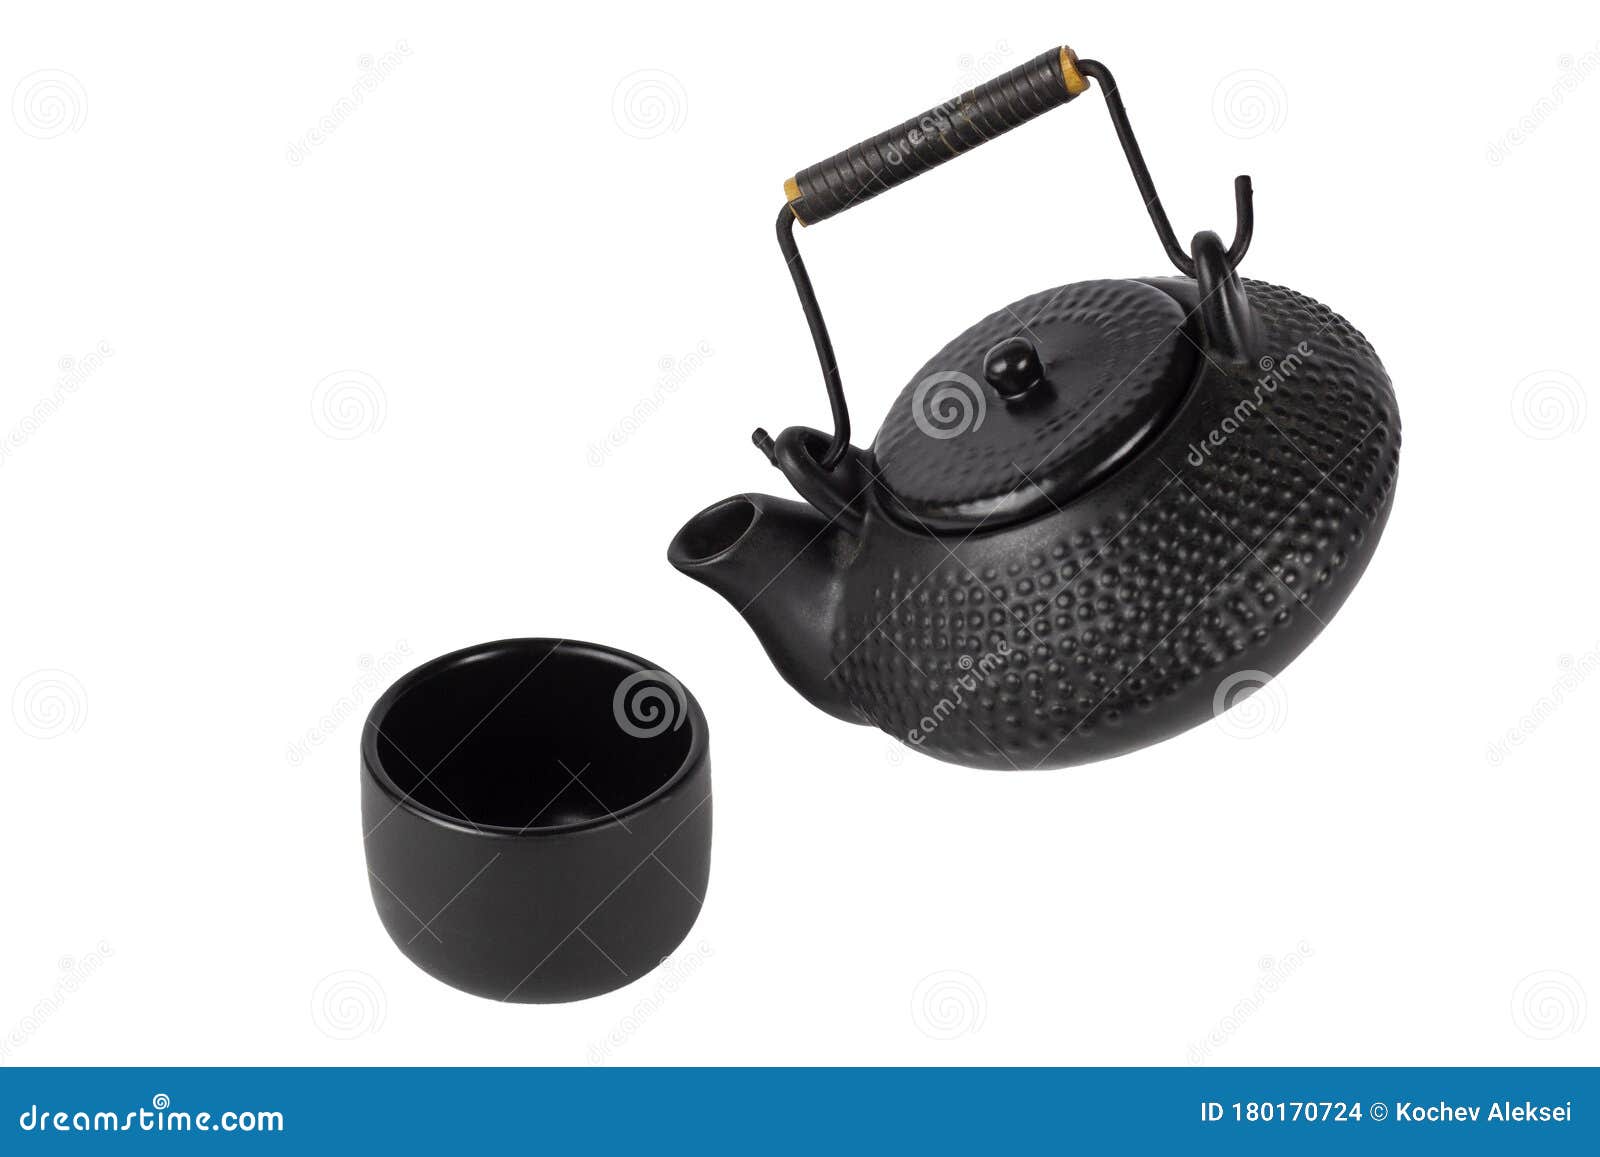 https://thumbs.dreamstime.com/z/teapot-cup-insulated-white-background-textured-clay-brewing-tea-hangs-over-slope-isolate-180170724.jpg